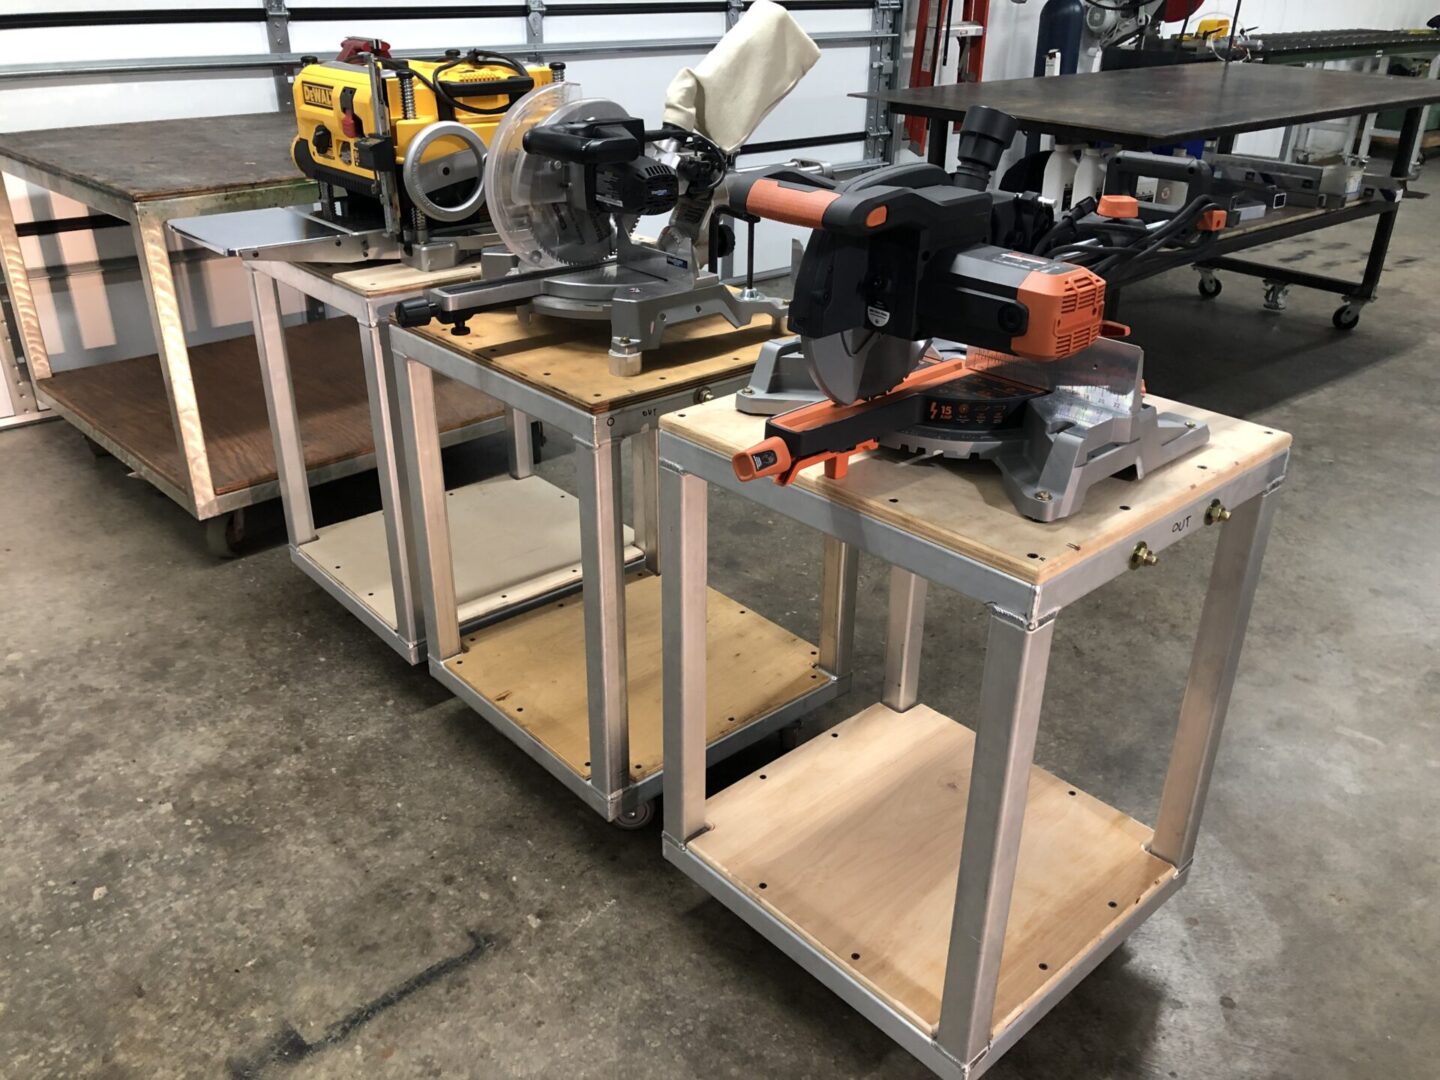 Side view of the Chop Saw and Planner Tables